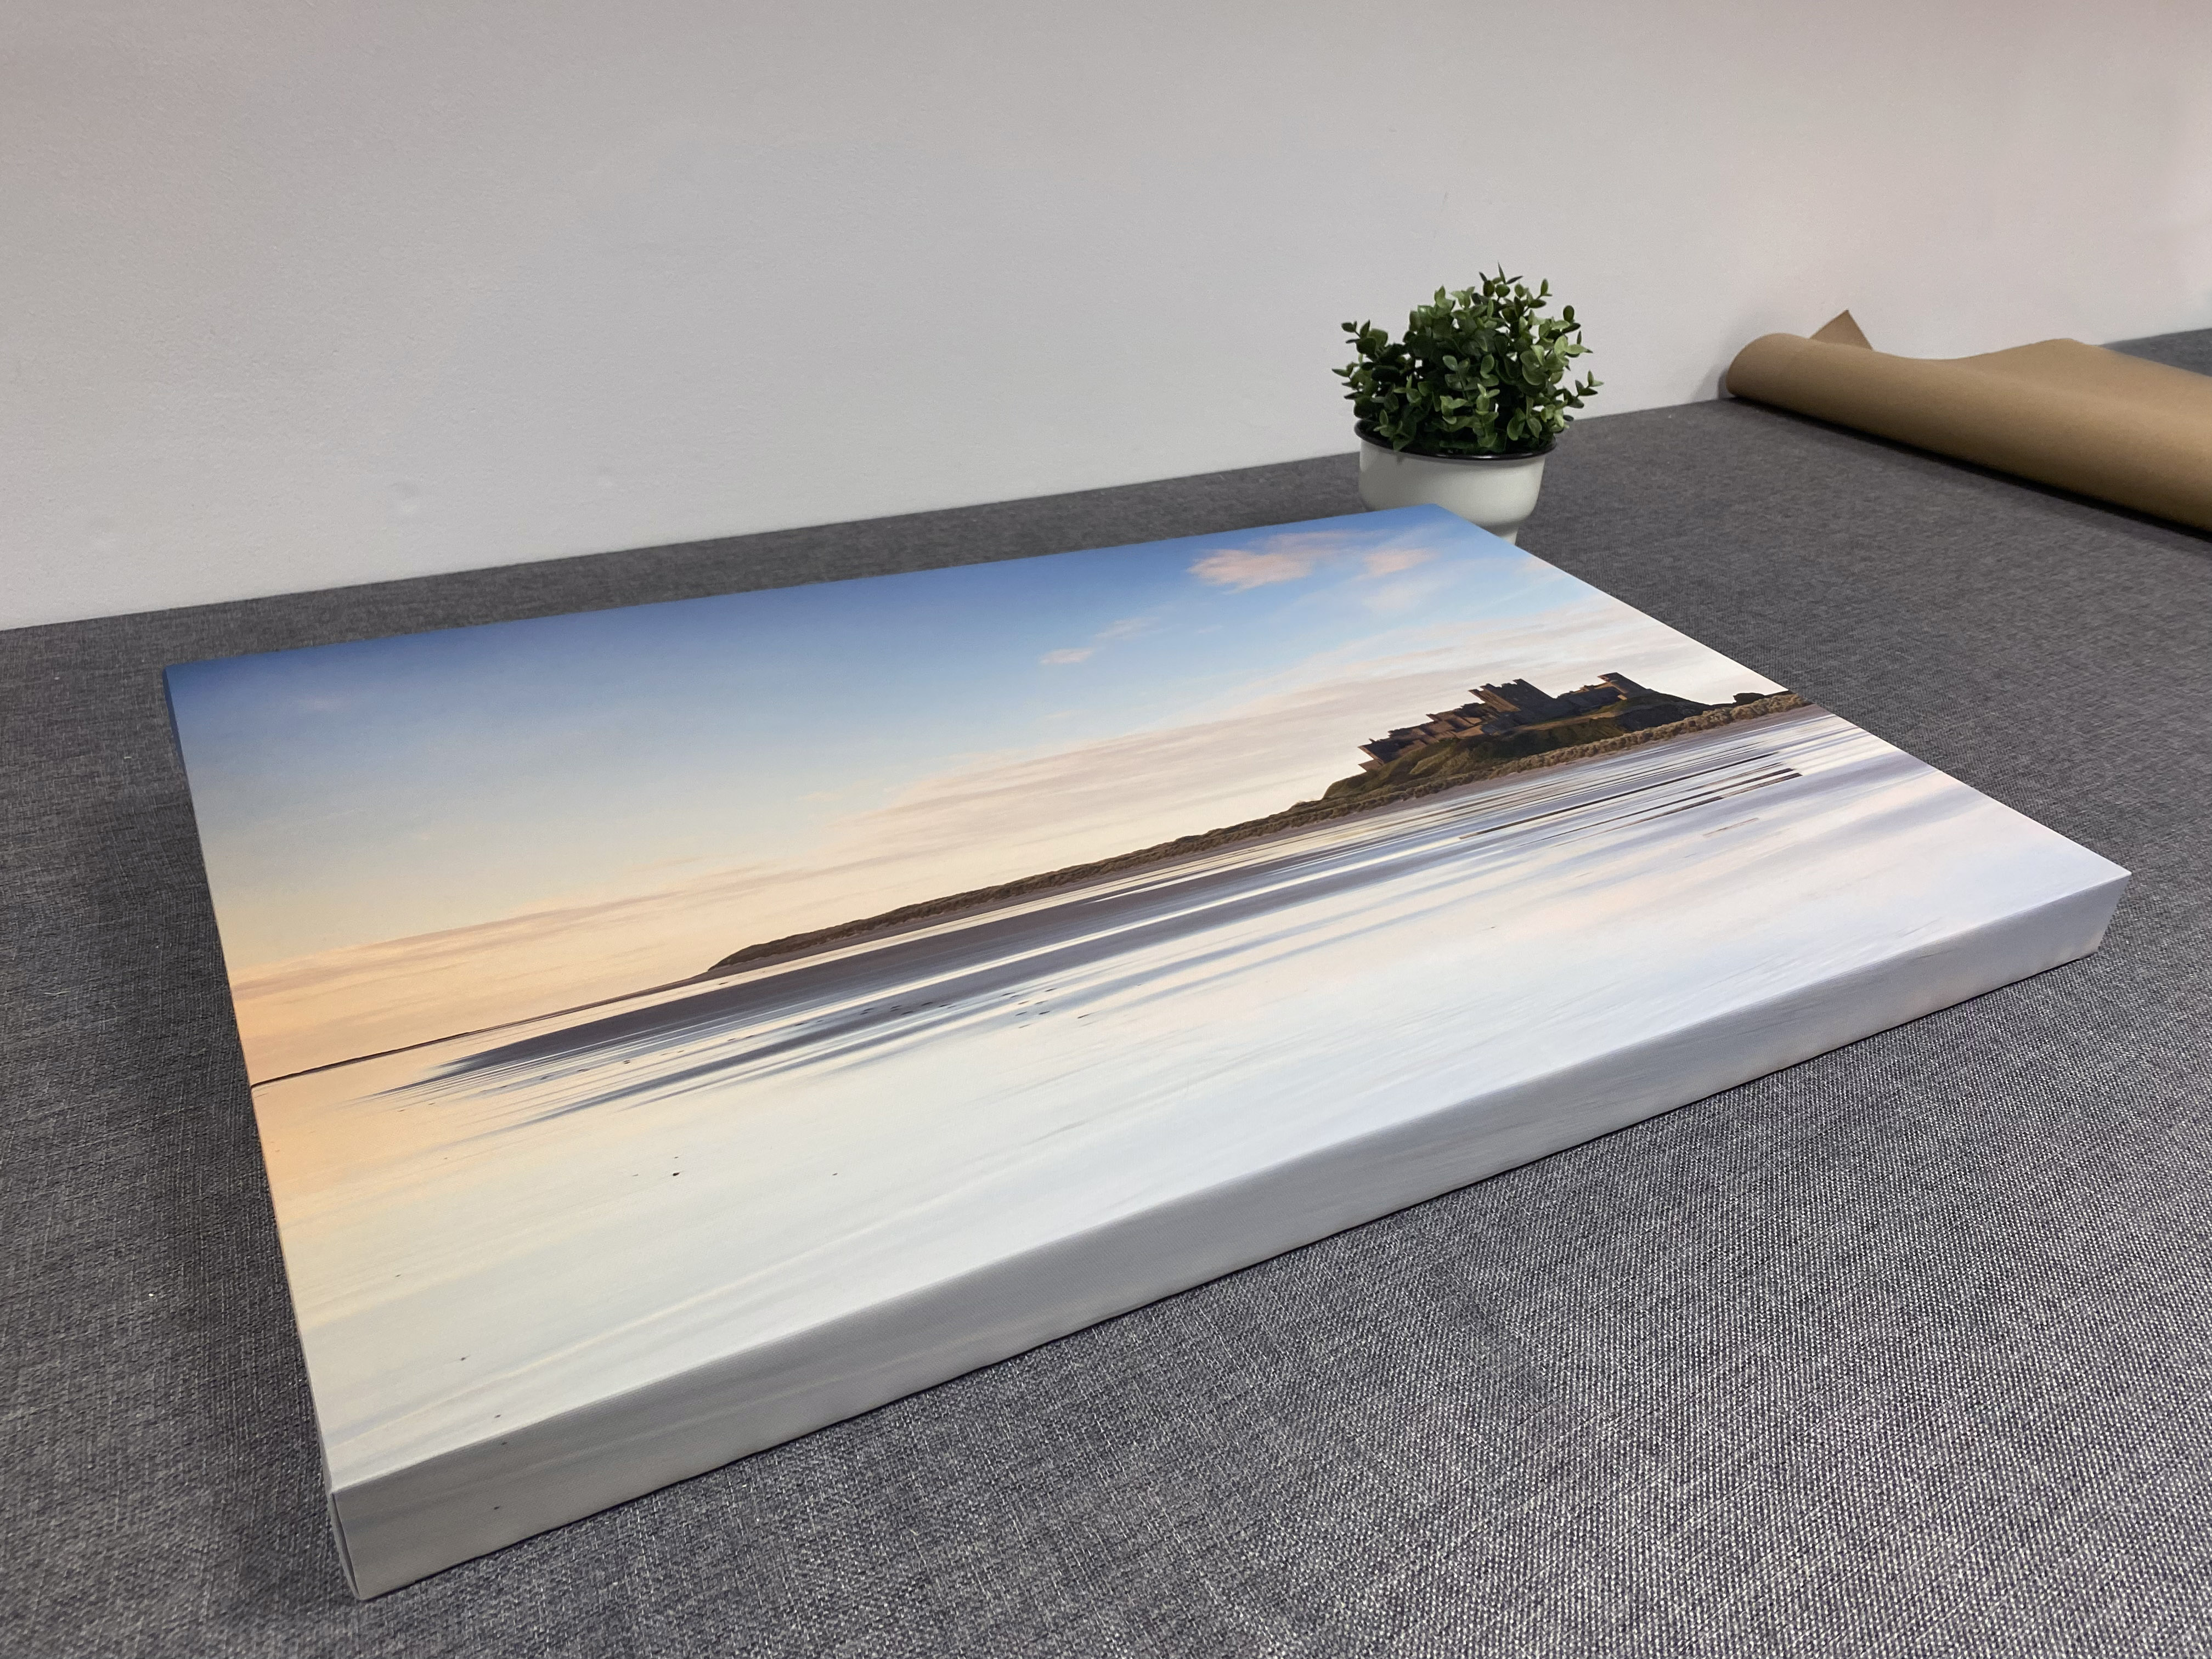 spcaious and airy landscape photography canvas print with same day dispatch when you order before 2pm Monday - Friday and free next working day delivery to UK mainland